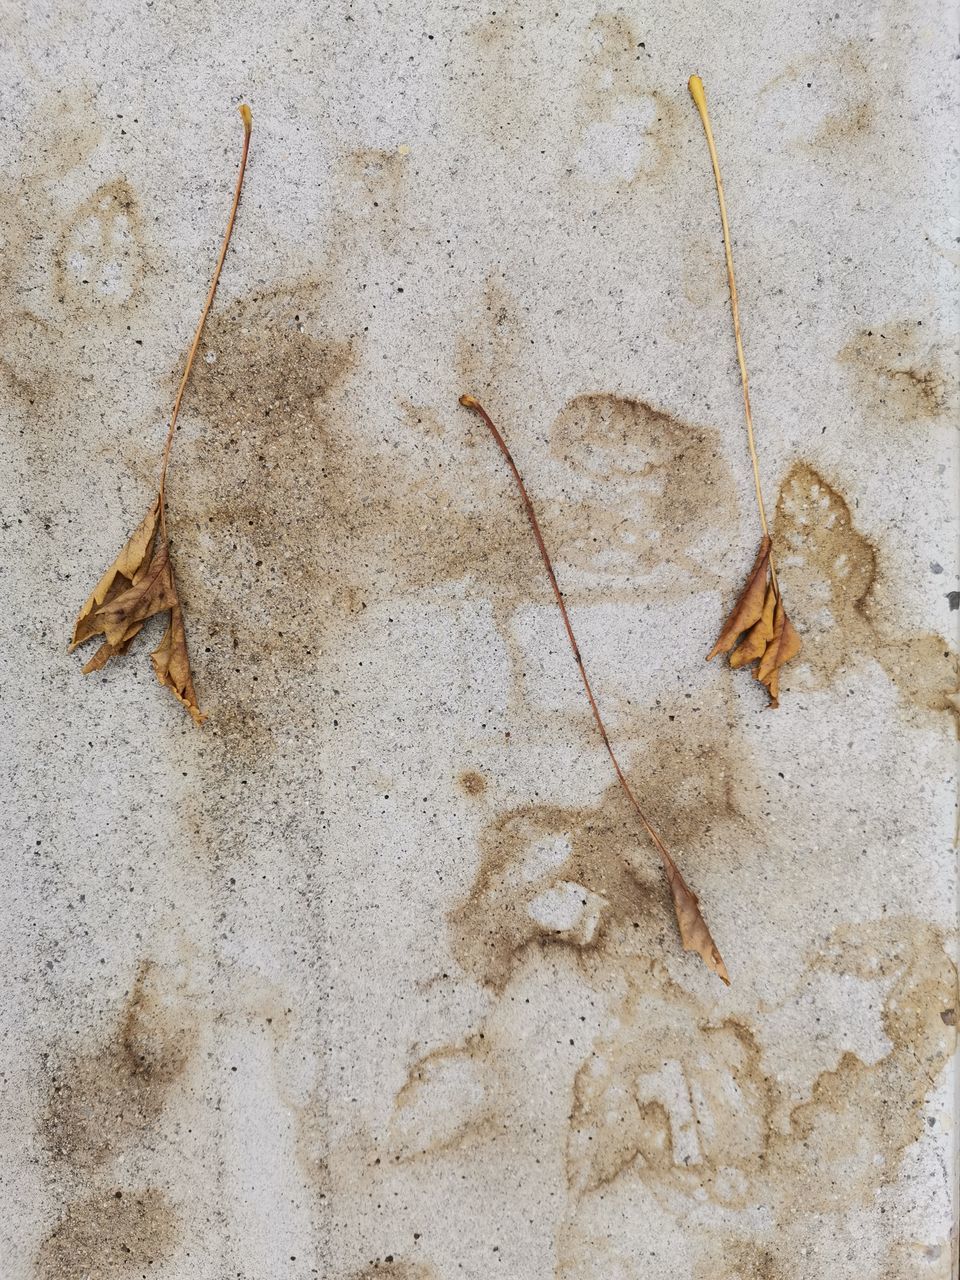 HIGH ANGLE VIEW OF DRY LEAVES ON CONCRETE WALL